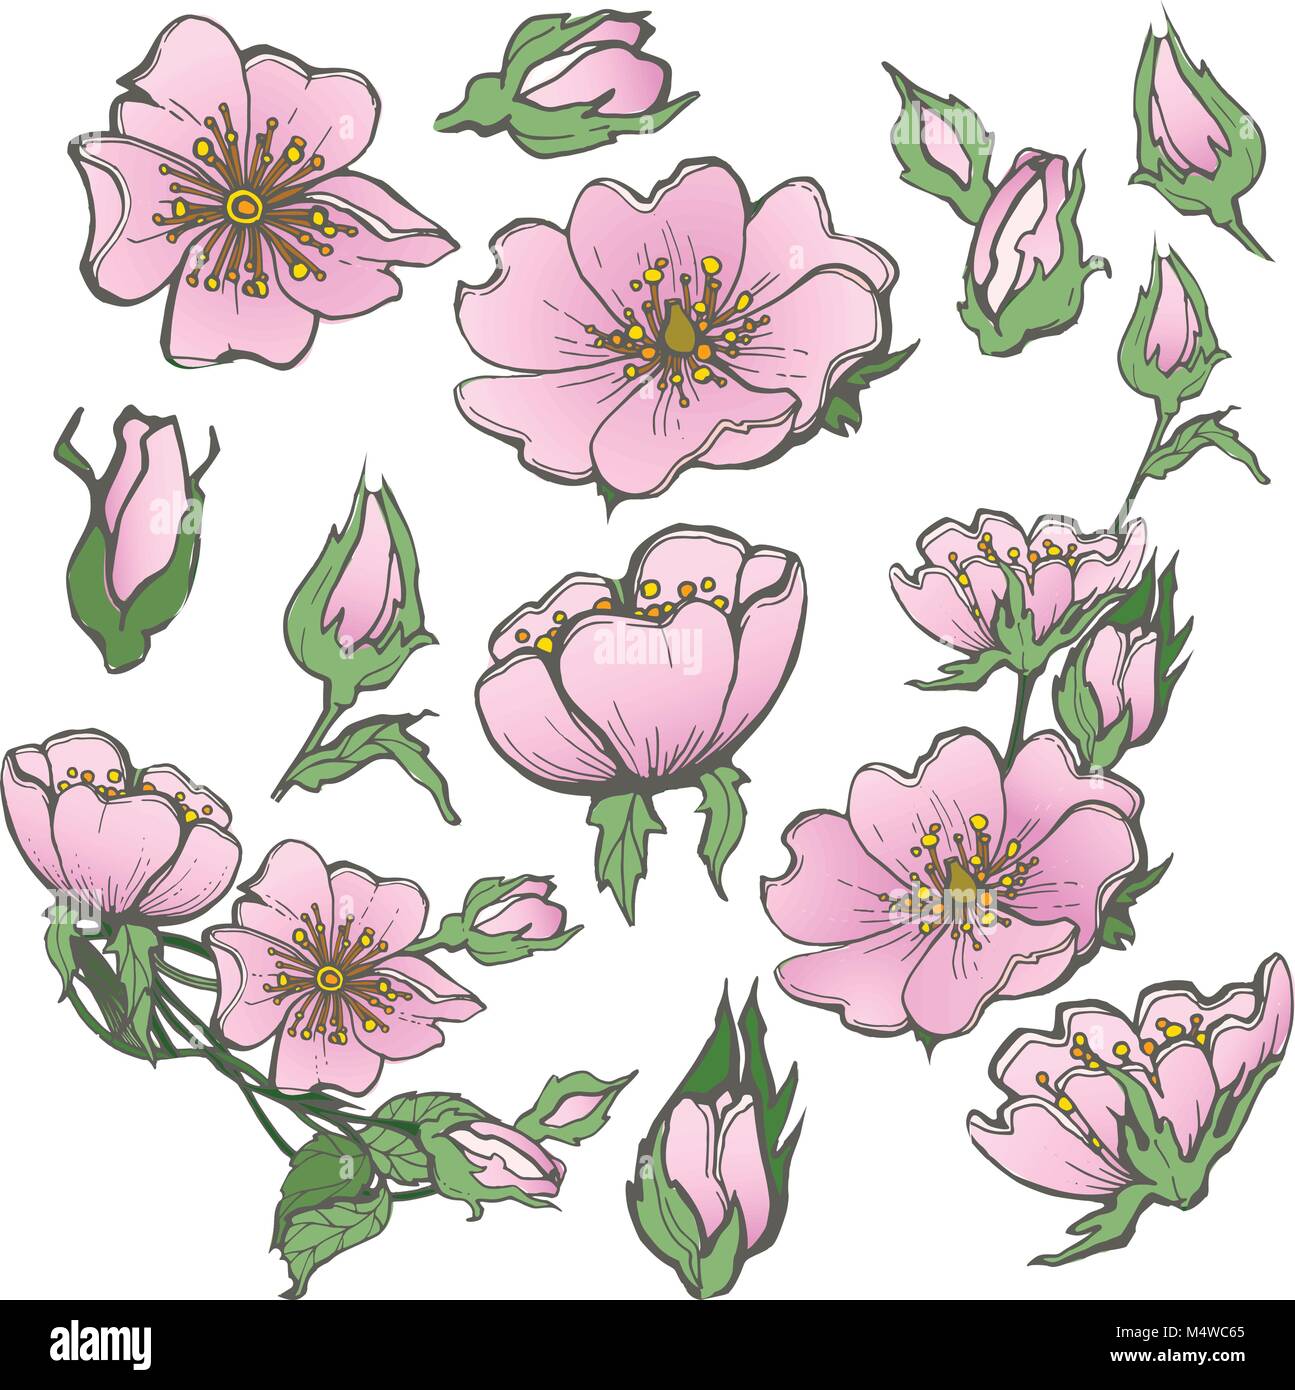 Wild dog rose set flowers with buds drawing vector clipart on white background for scrapbooking Stock Vector